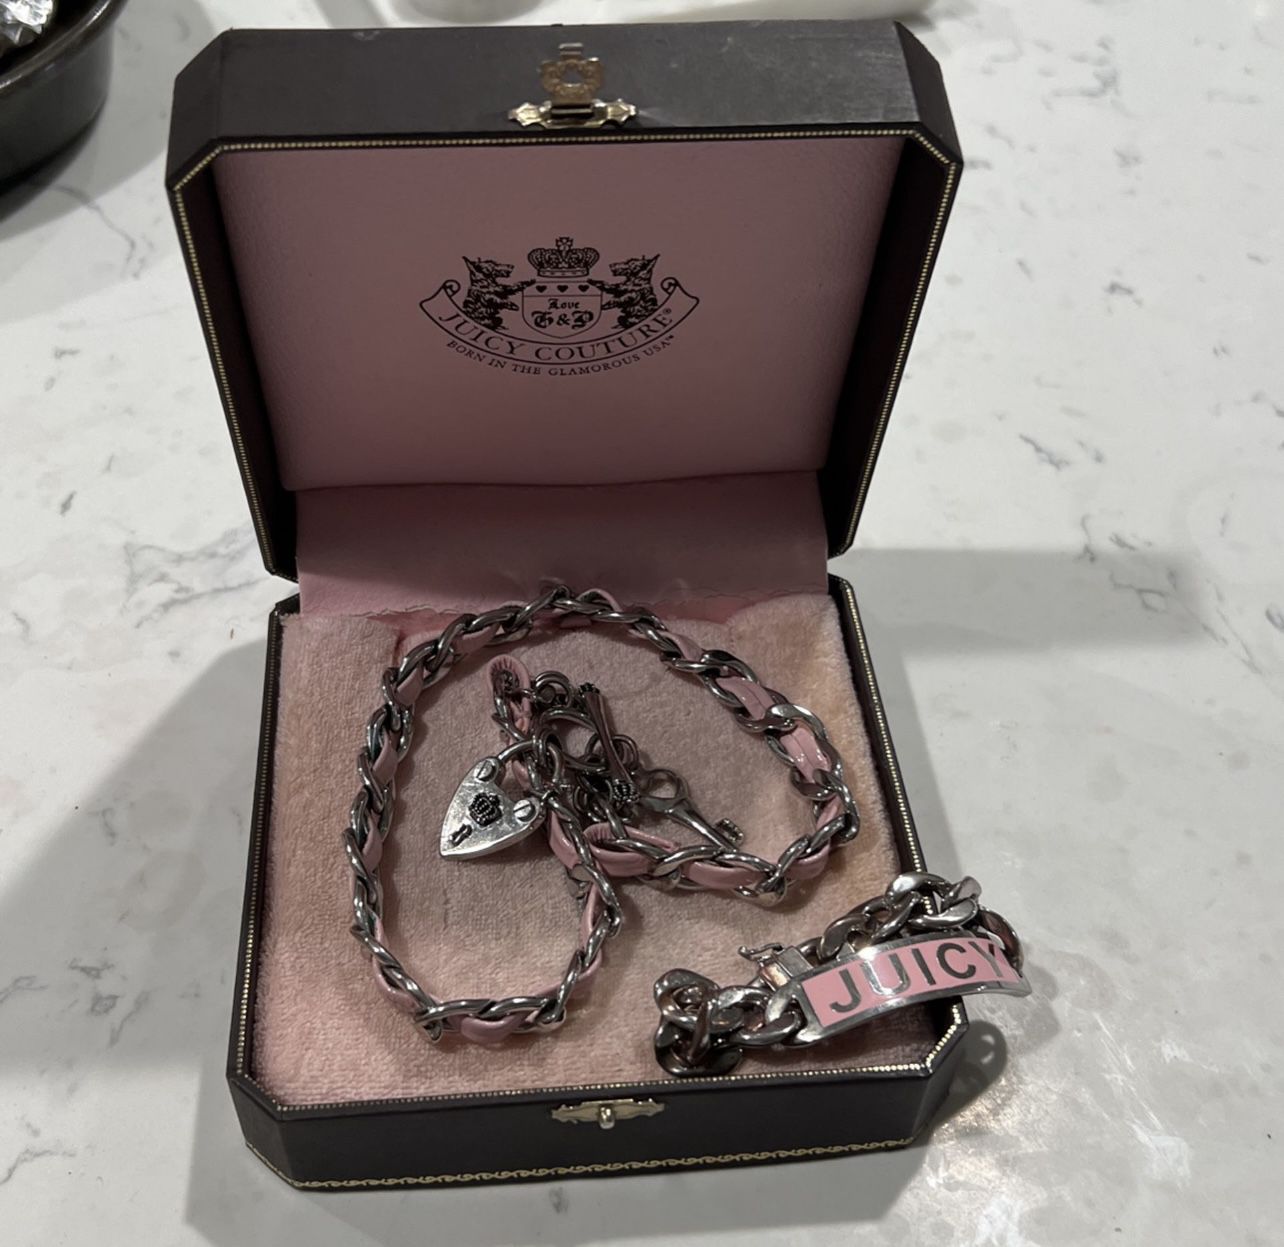 Juicy Couture Necklace for Sale in Tujunga, CA - OfferUp